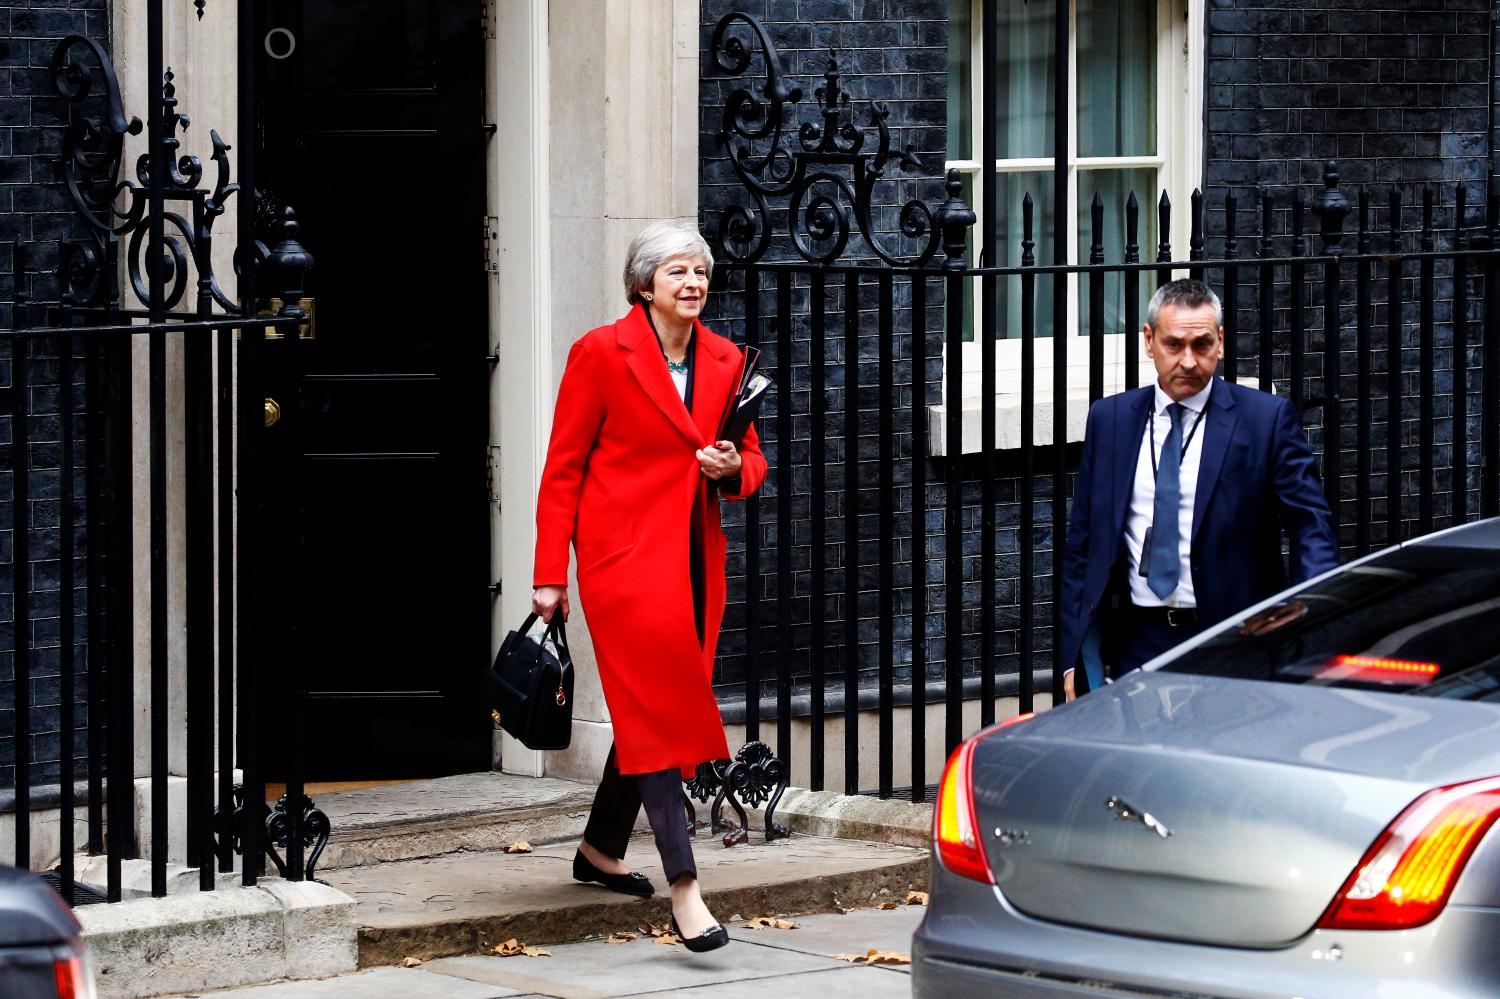 Britain's Prime Minister, Theresa May, leaves 10 Downing Street, to make a statement in the House of Commons, in London, Britain November 15, 2018.    REUTERS/Peter Nicholls - RC1620B3D870